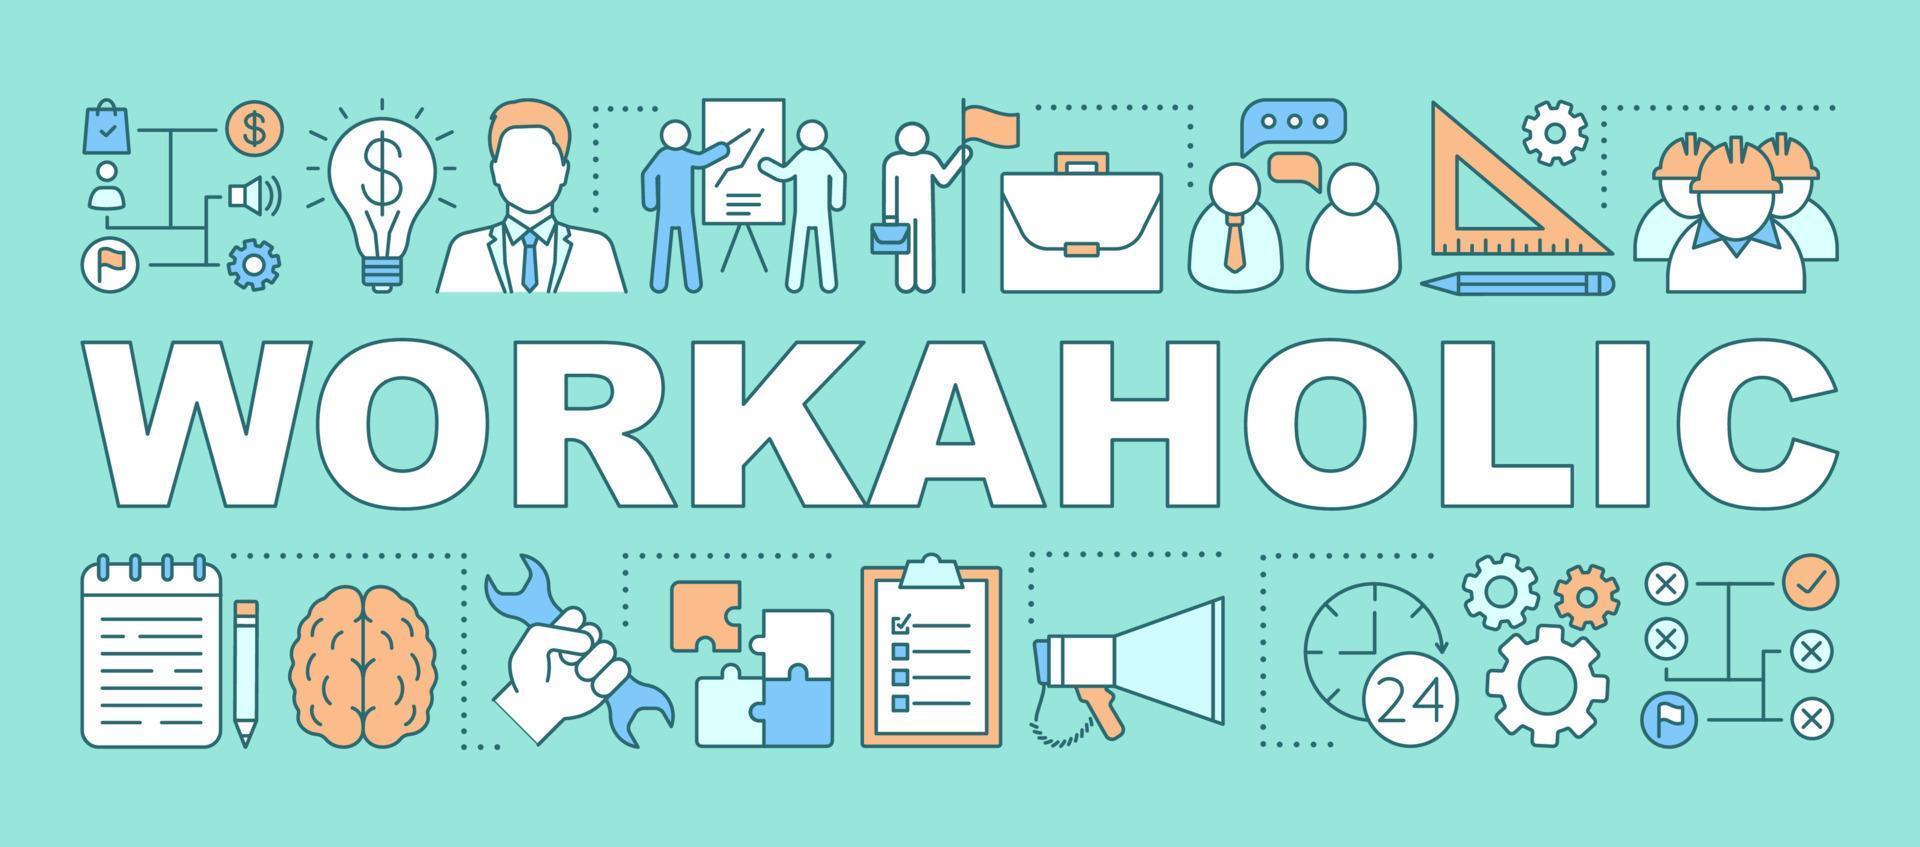 Workaholic word concepts banner. Work addiction. Business management. Working overtime. Presentation, website. Isolated lettering typography idea with linear icons. Vector outline illustration